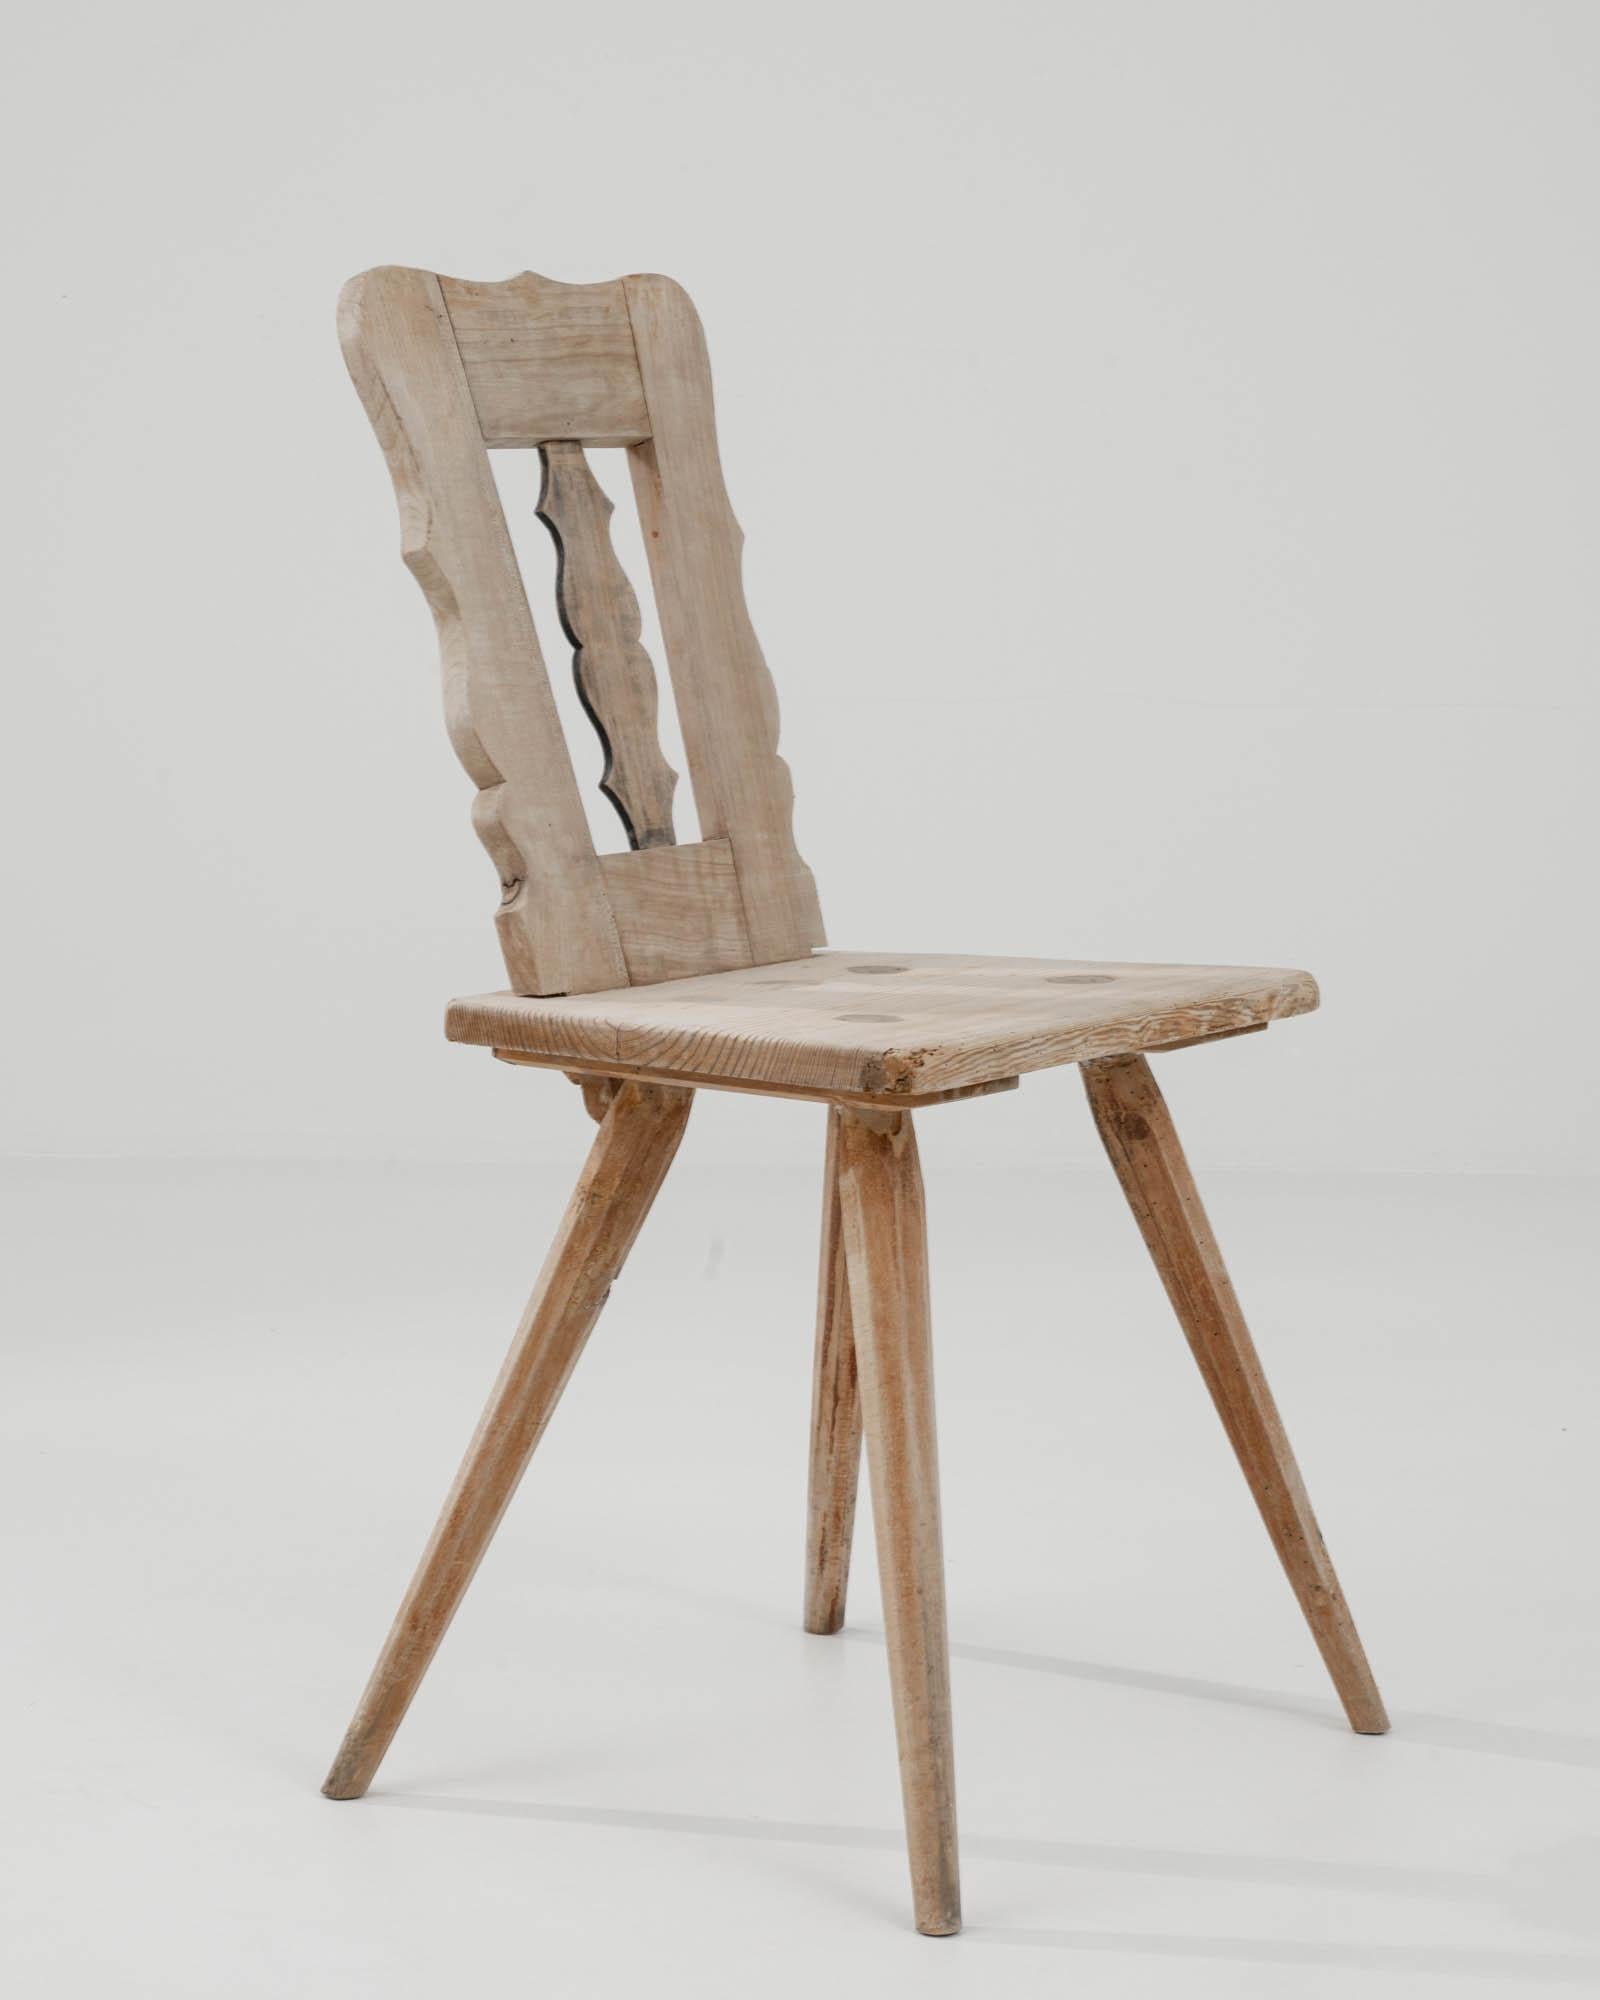 Rustic French Wooden Chair 3